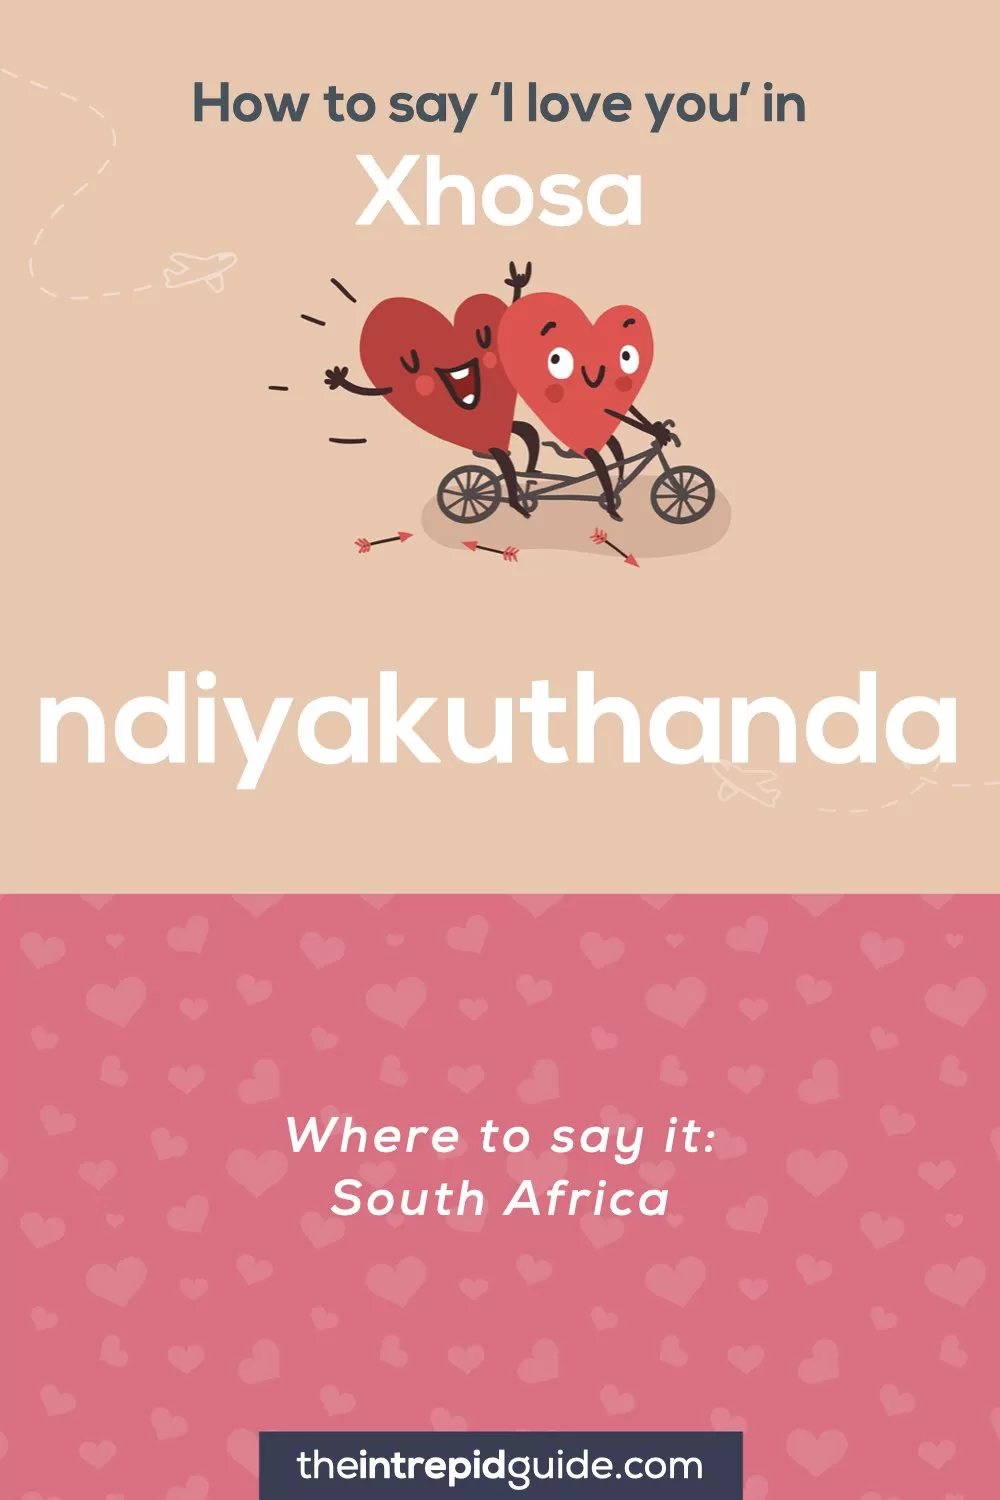 How to say I love you in different languages - Xhosa - ndiyakuthanda